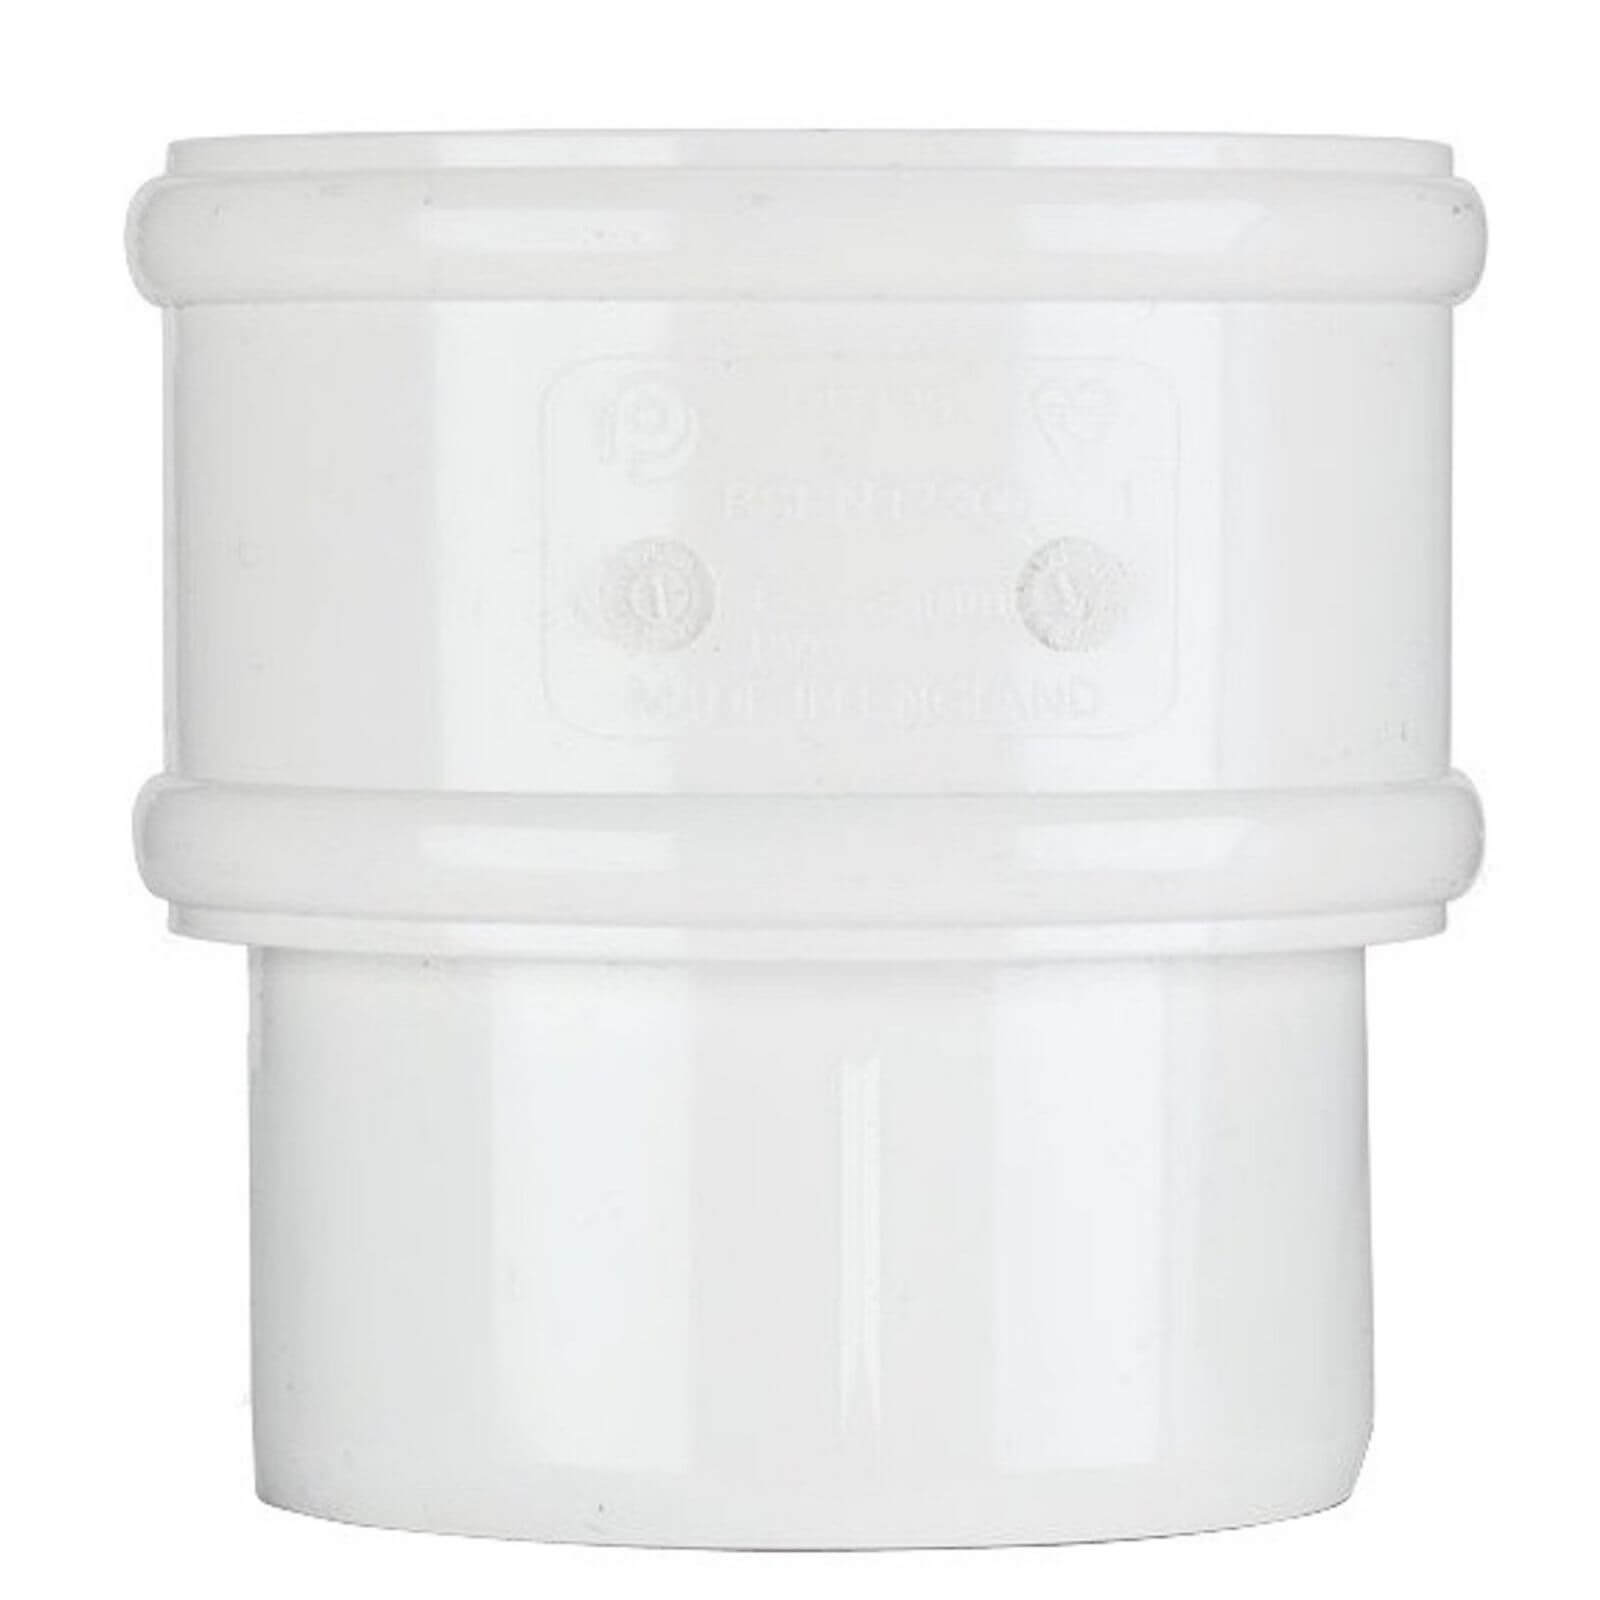 Polypipe Round Downpipe Connector - 68mm - White